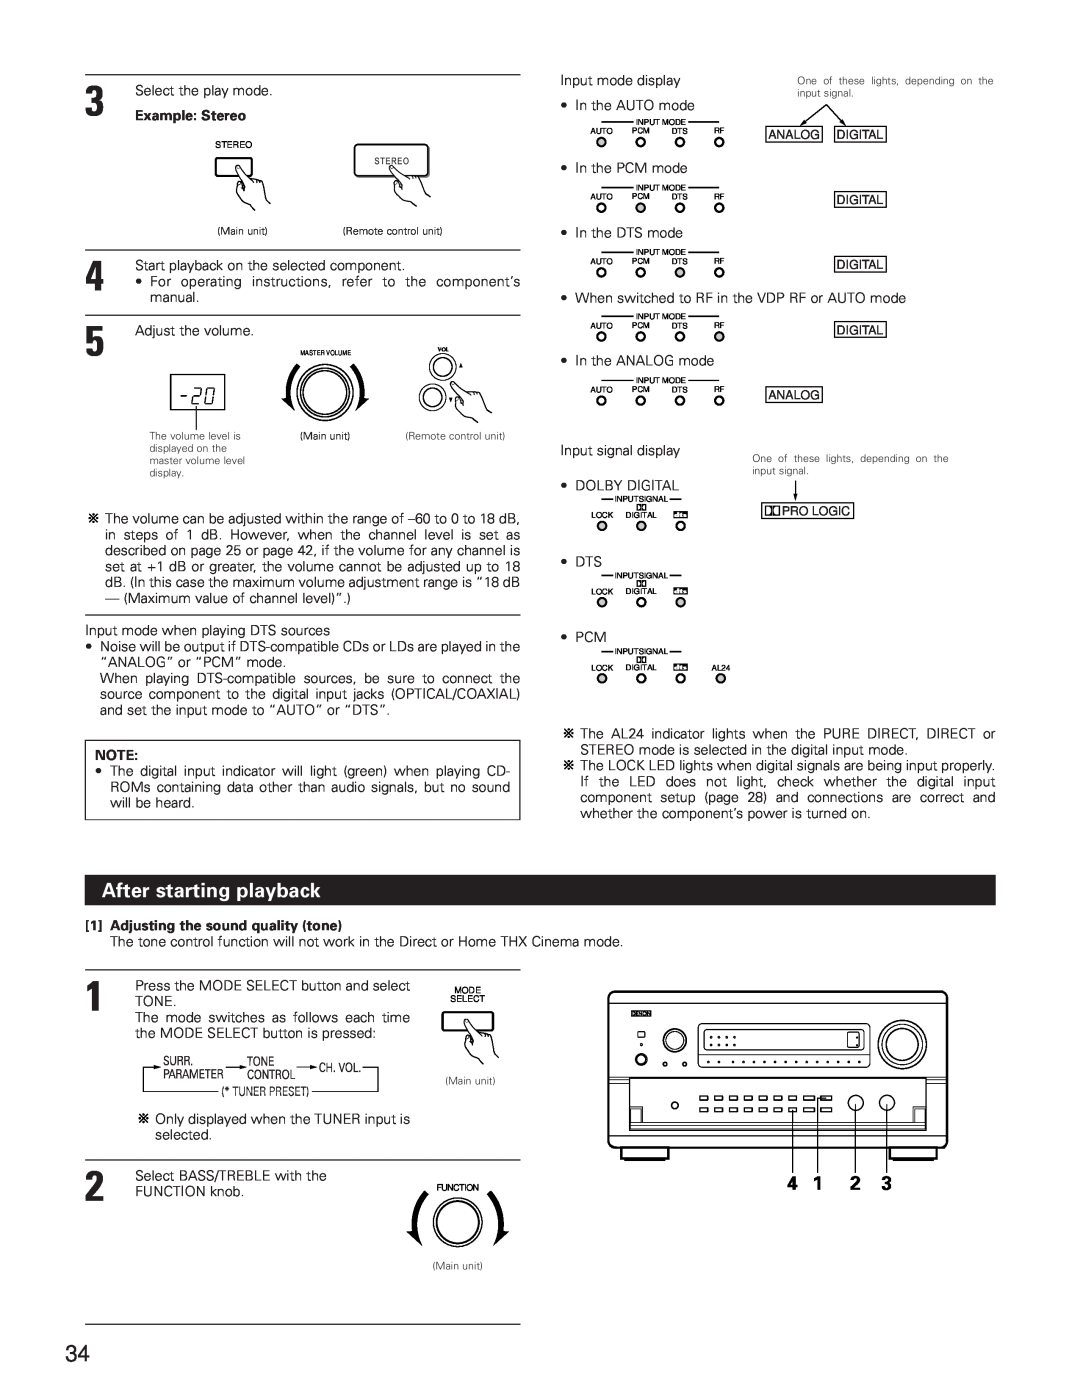 Denon AVR-5800 operating instructions After starting playback, Example Stereo, 1Adjusting the sound quality tone 